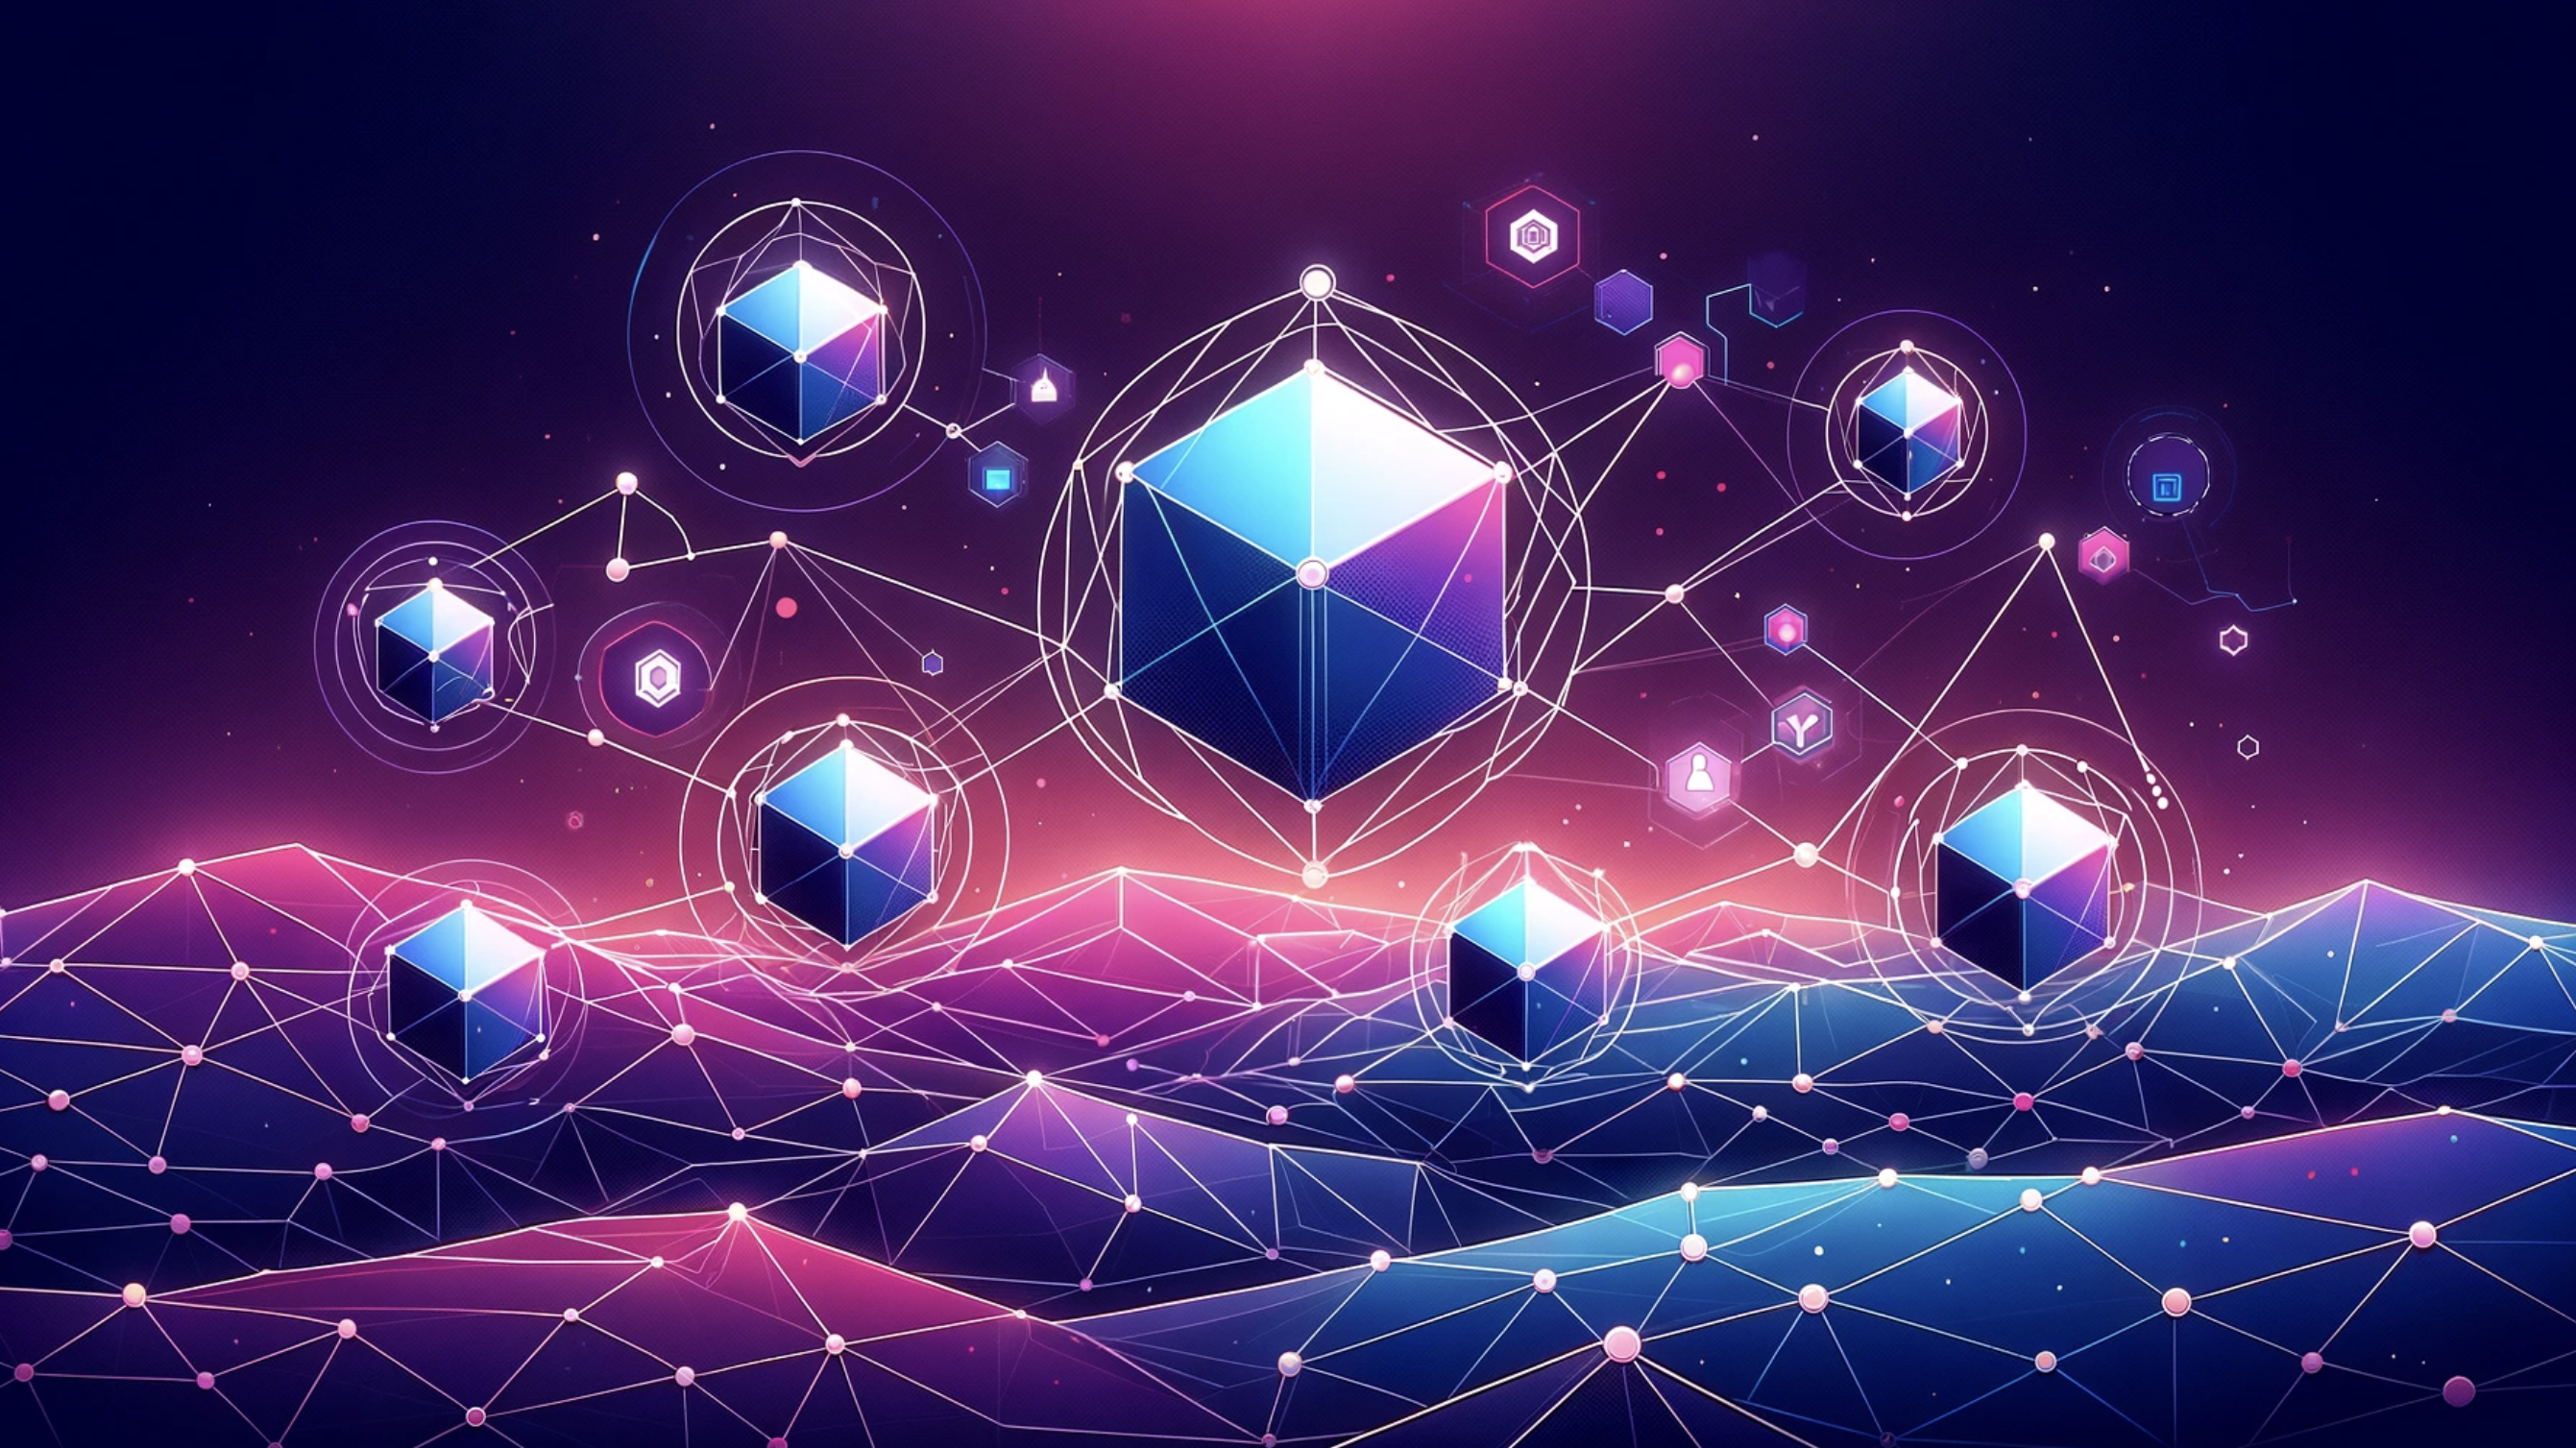 Components of the Polygon Ecosystem - Showing blockchains and dapps connected